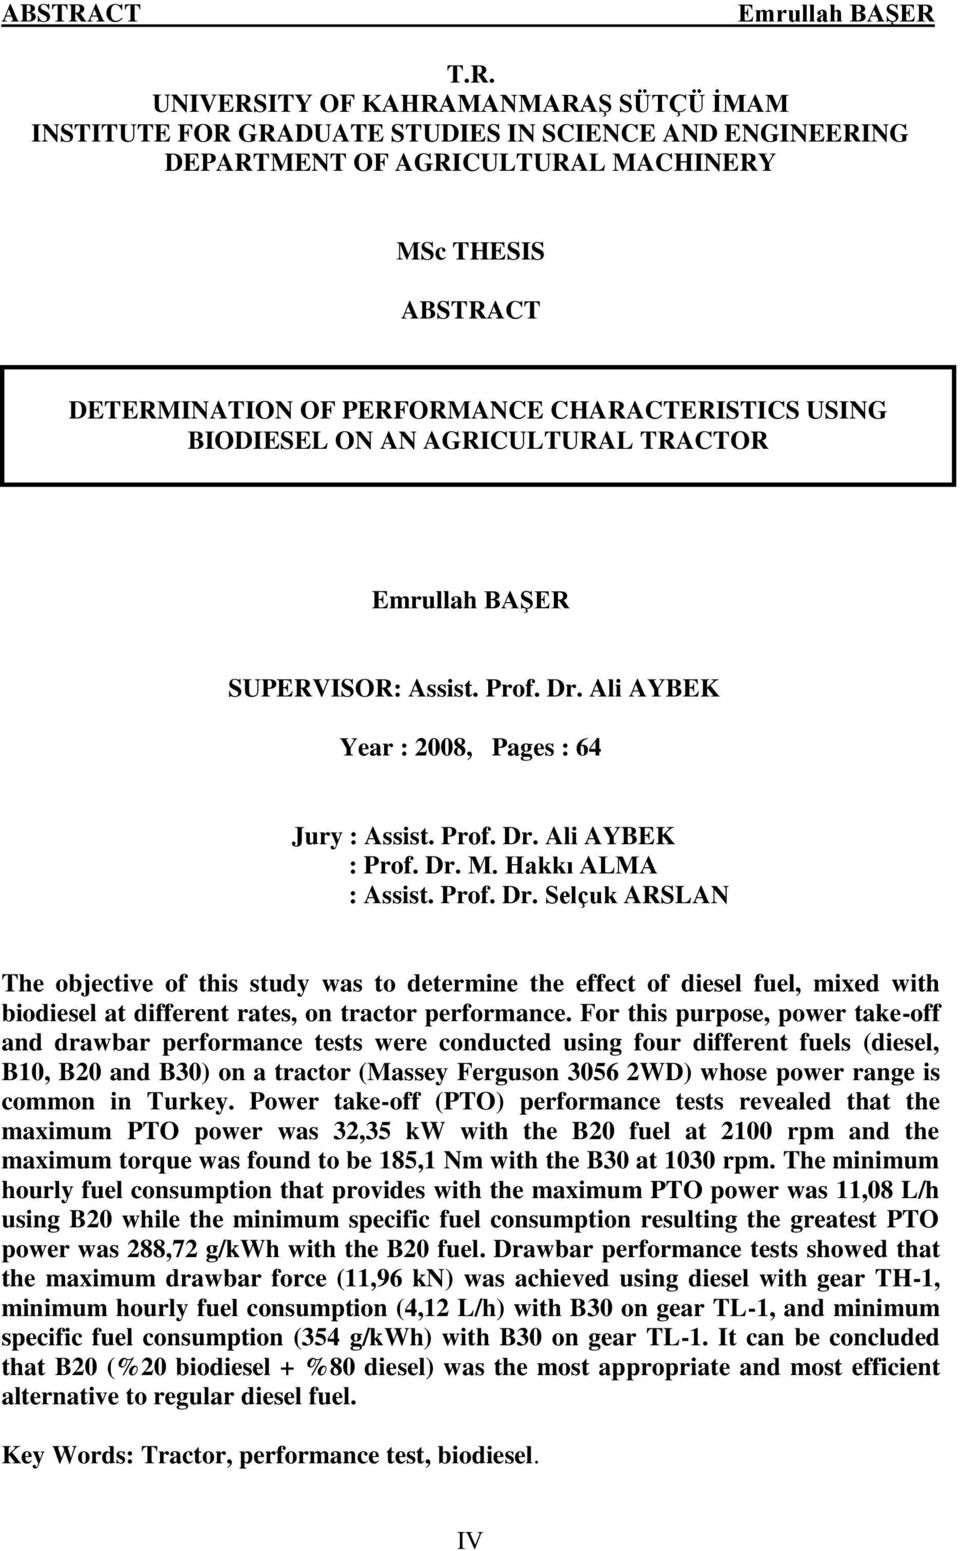 UNIVERSITY OF KAHRAMANMARAġ SÜTÇÜ ĠMAM INSTITUTE FOR GRADUATE STUDIES IN SCIENCE AND ENGINEERING DEPARTMENT OF AGRICULTURAL MACHINERY MSc THESIS CT DETERMINATION OF PERFORMANCE CHARACTERISTICS USING